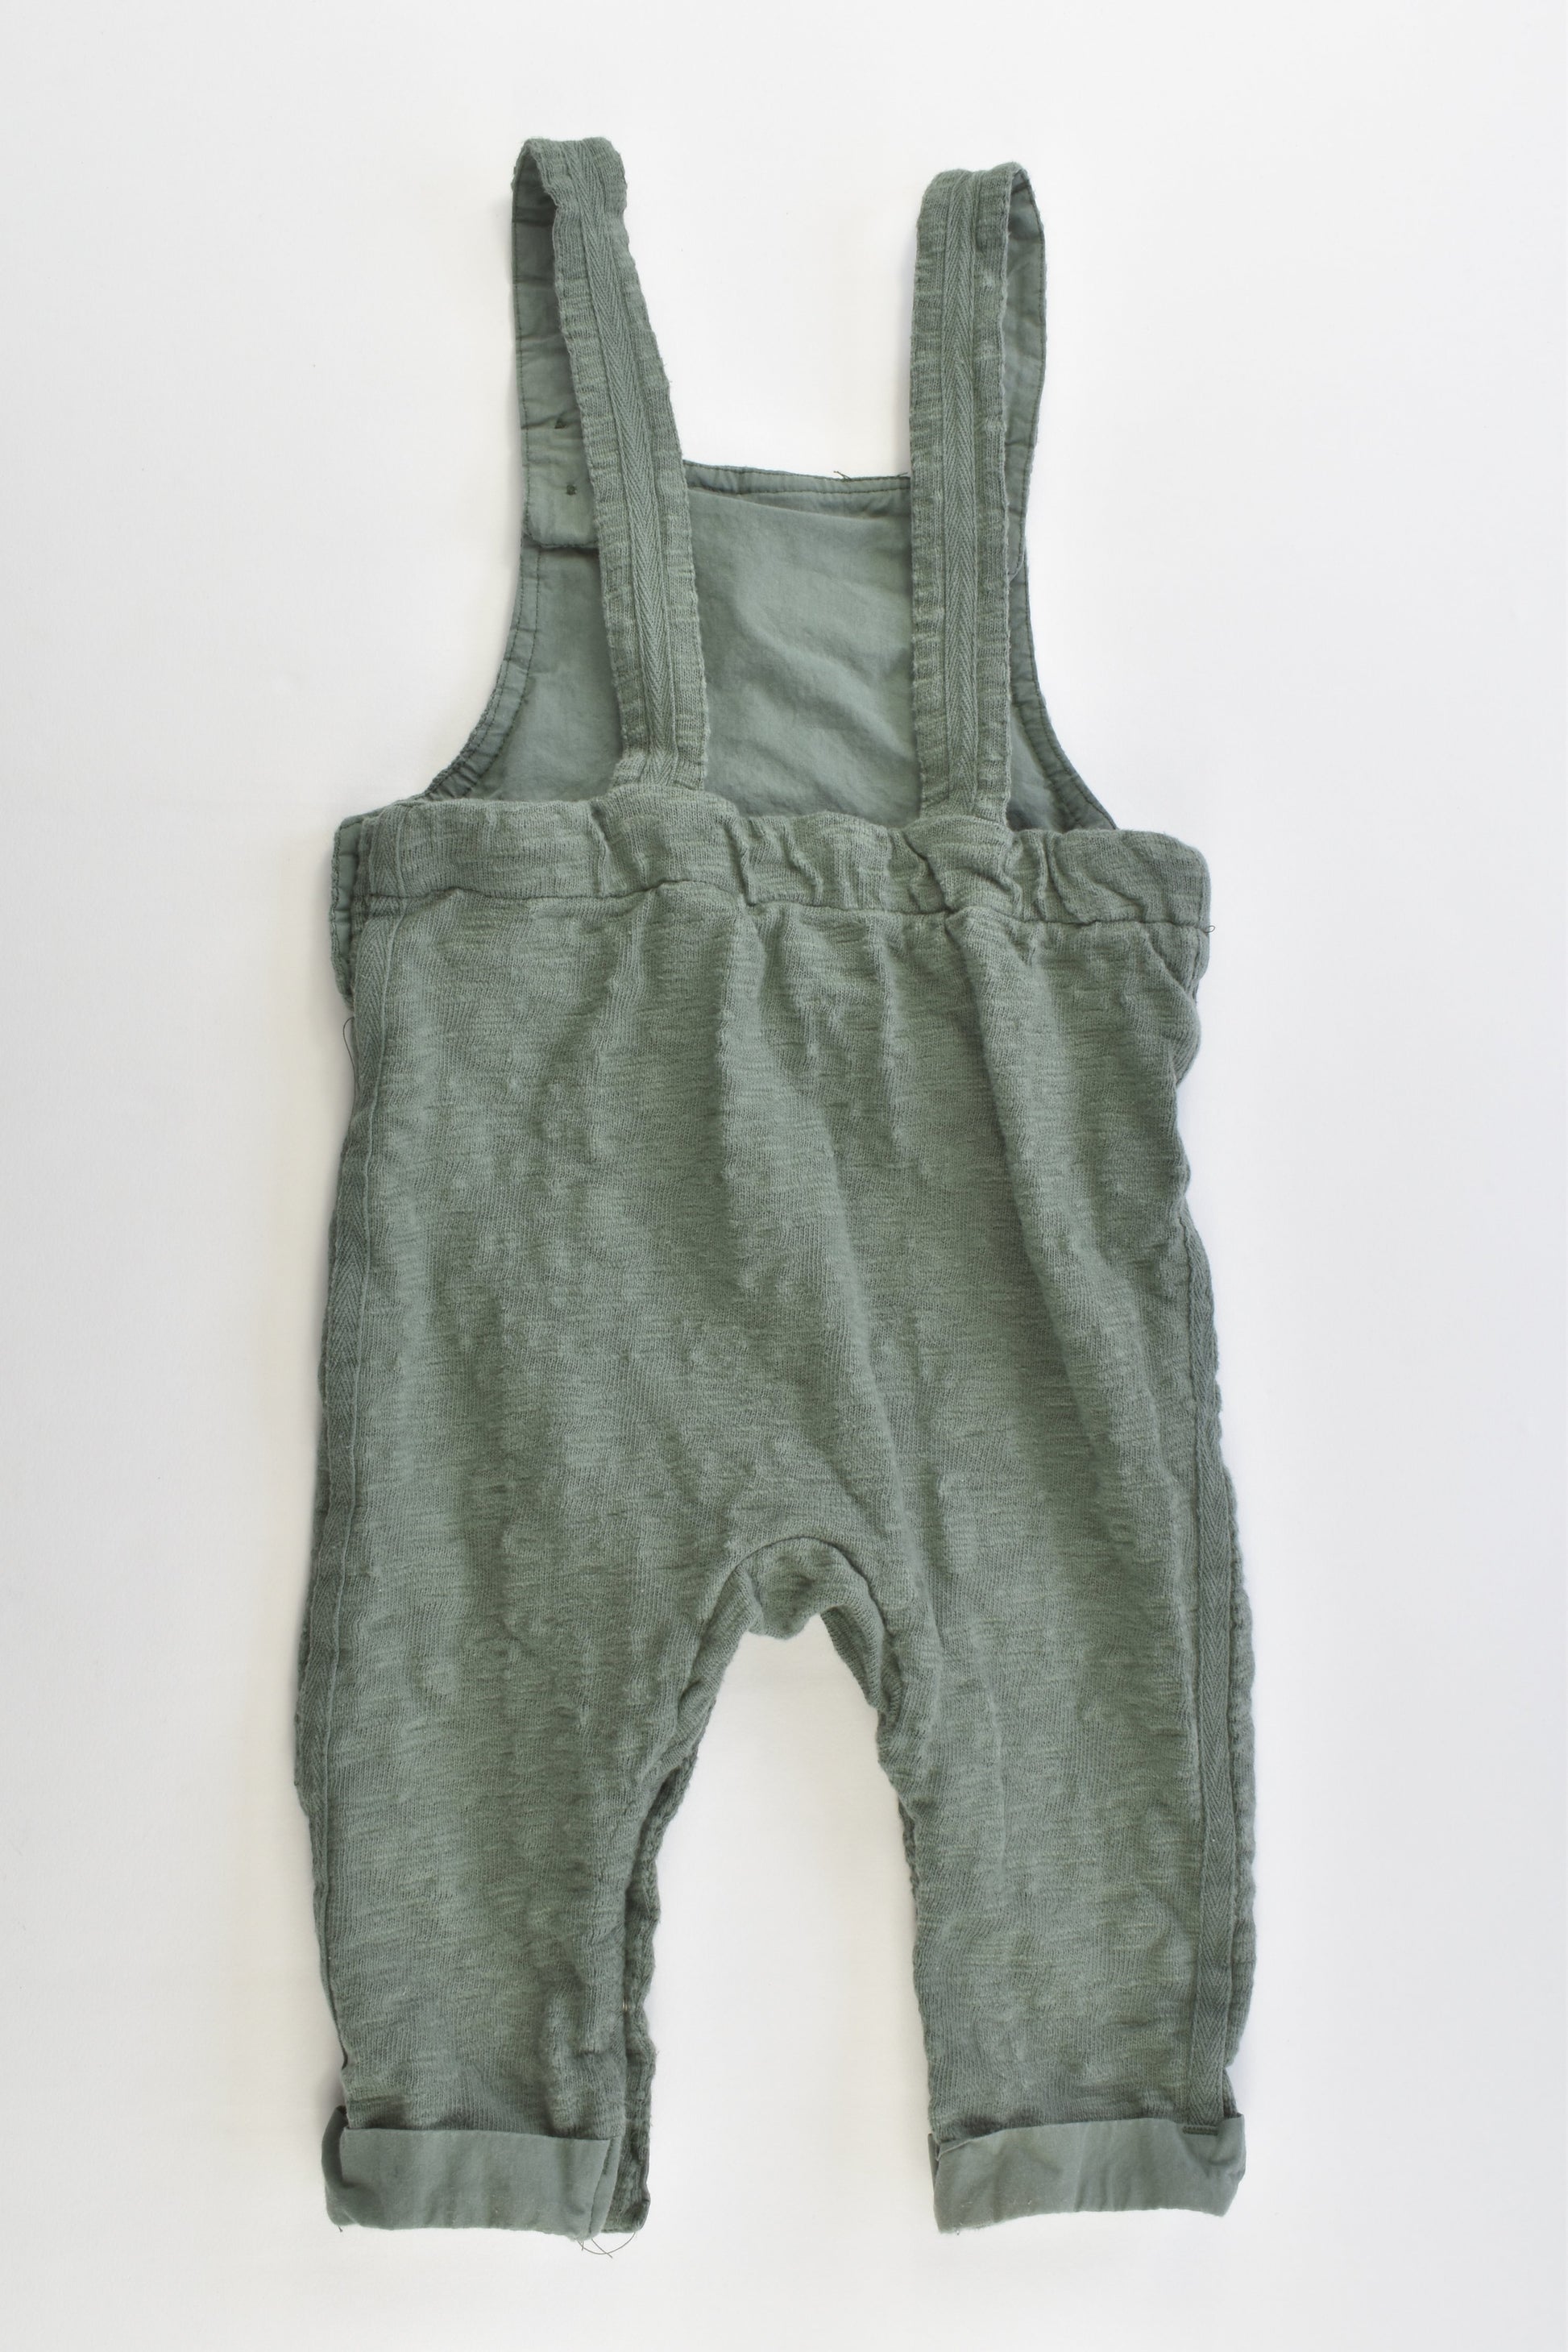 Seed Heritage Size 0 (6-12 months) Overalls